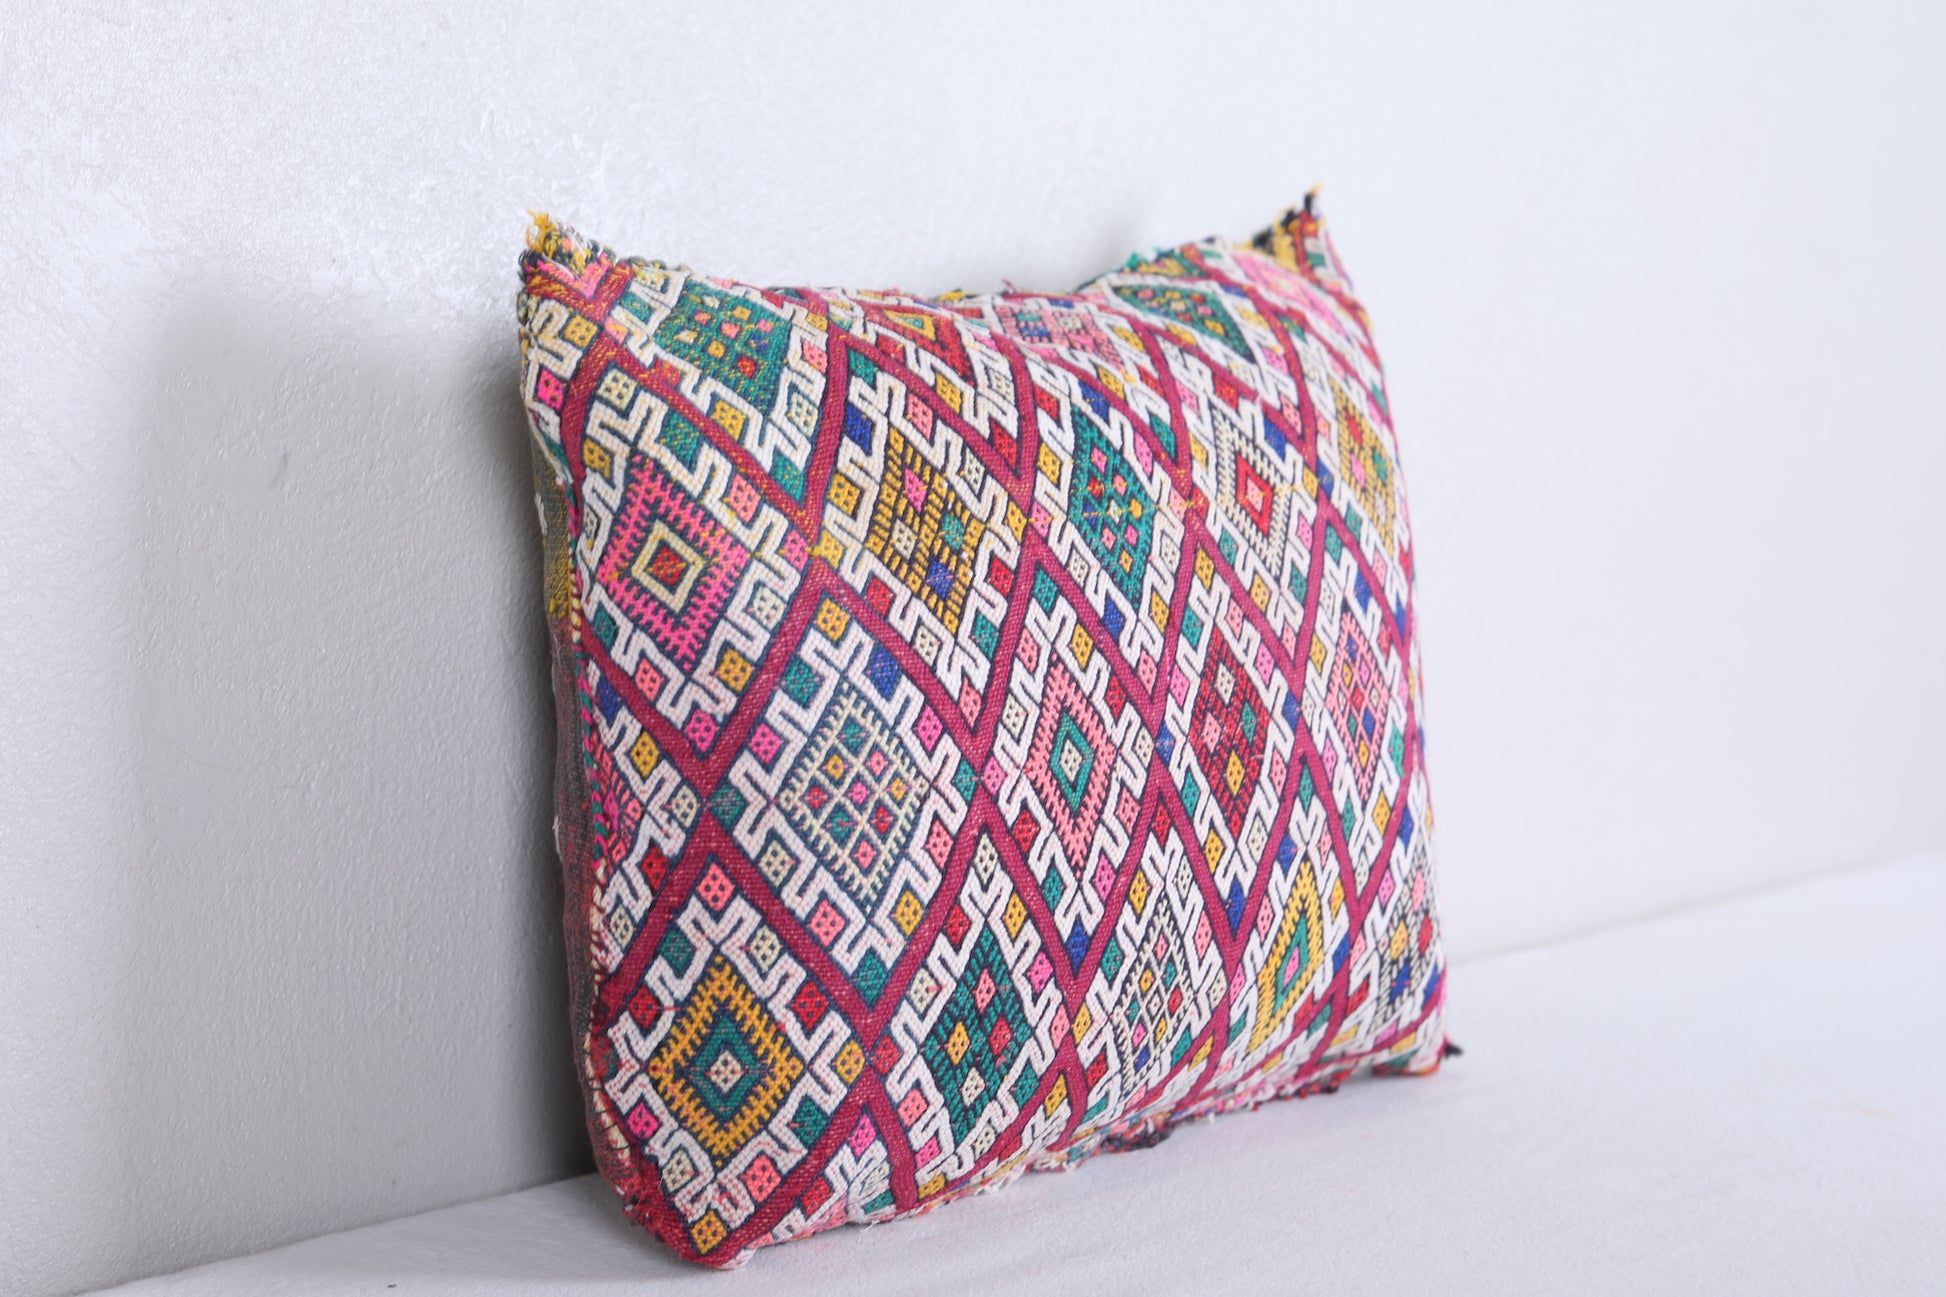 Vintage moroccan handwoven kilim pillow 12.5 INCHES X 15.7 INCHES